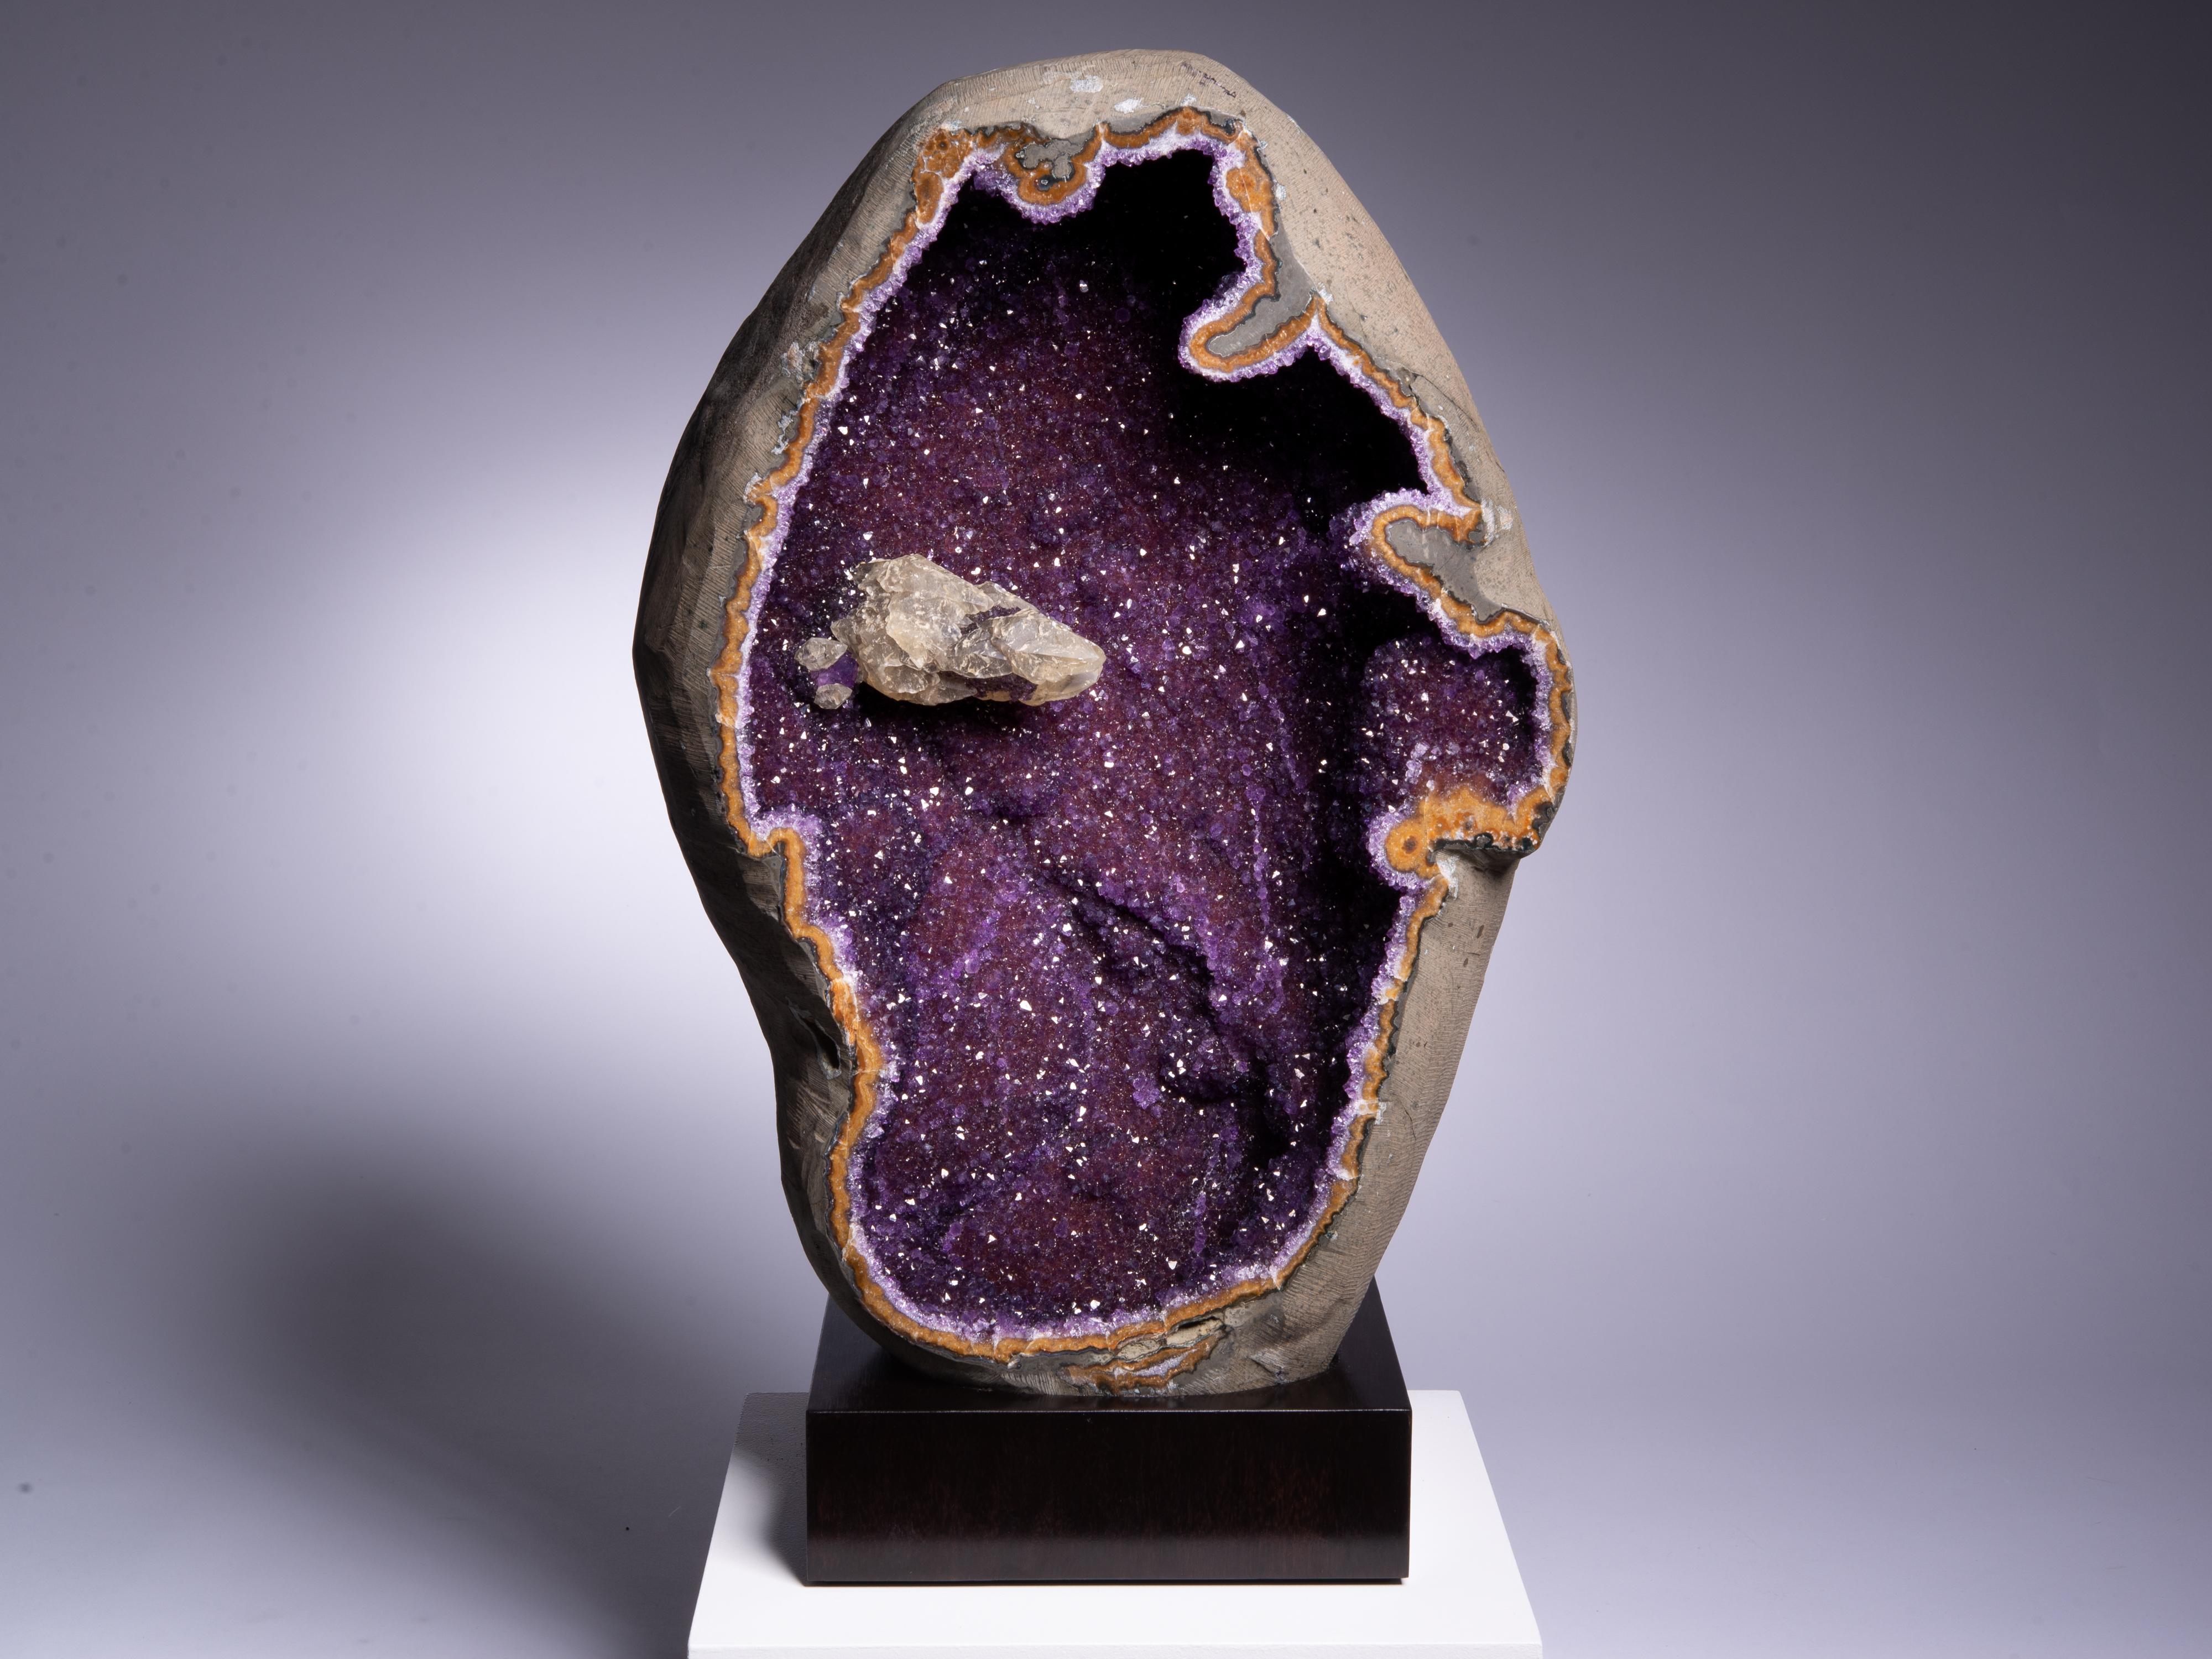 This split geode reveals incredibly intense amethyst with a calcite to the
upper left. The almost impossibly intense colour is a product of the
rich amethyst overlaid on a bed of unusual orange agate. The exterior
smoothed basalt.

This piece